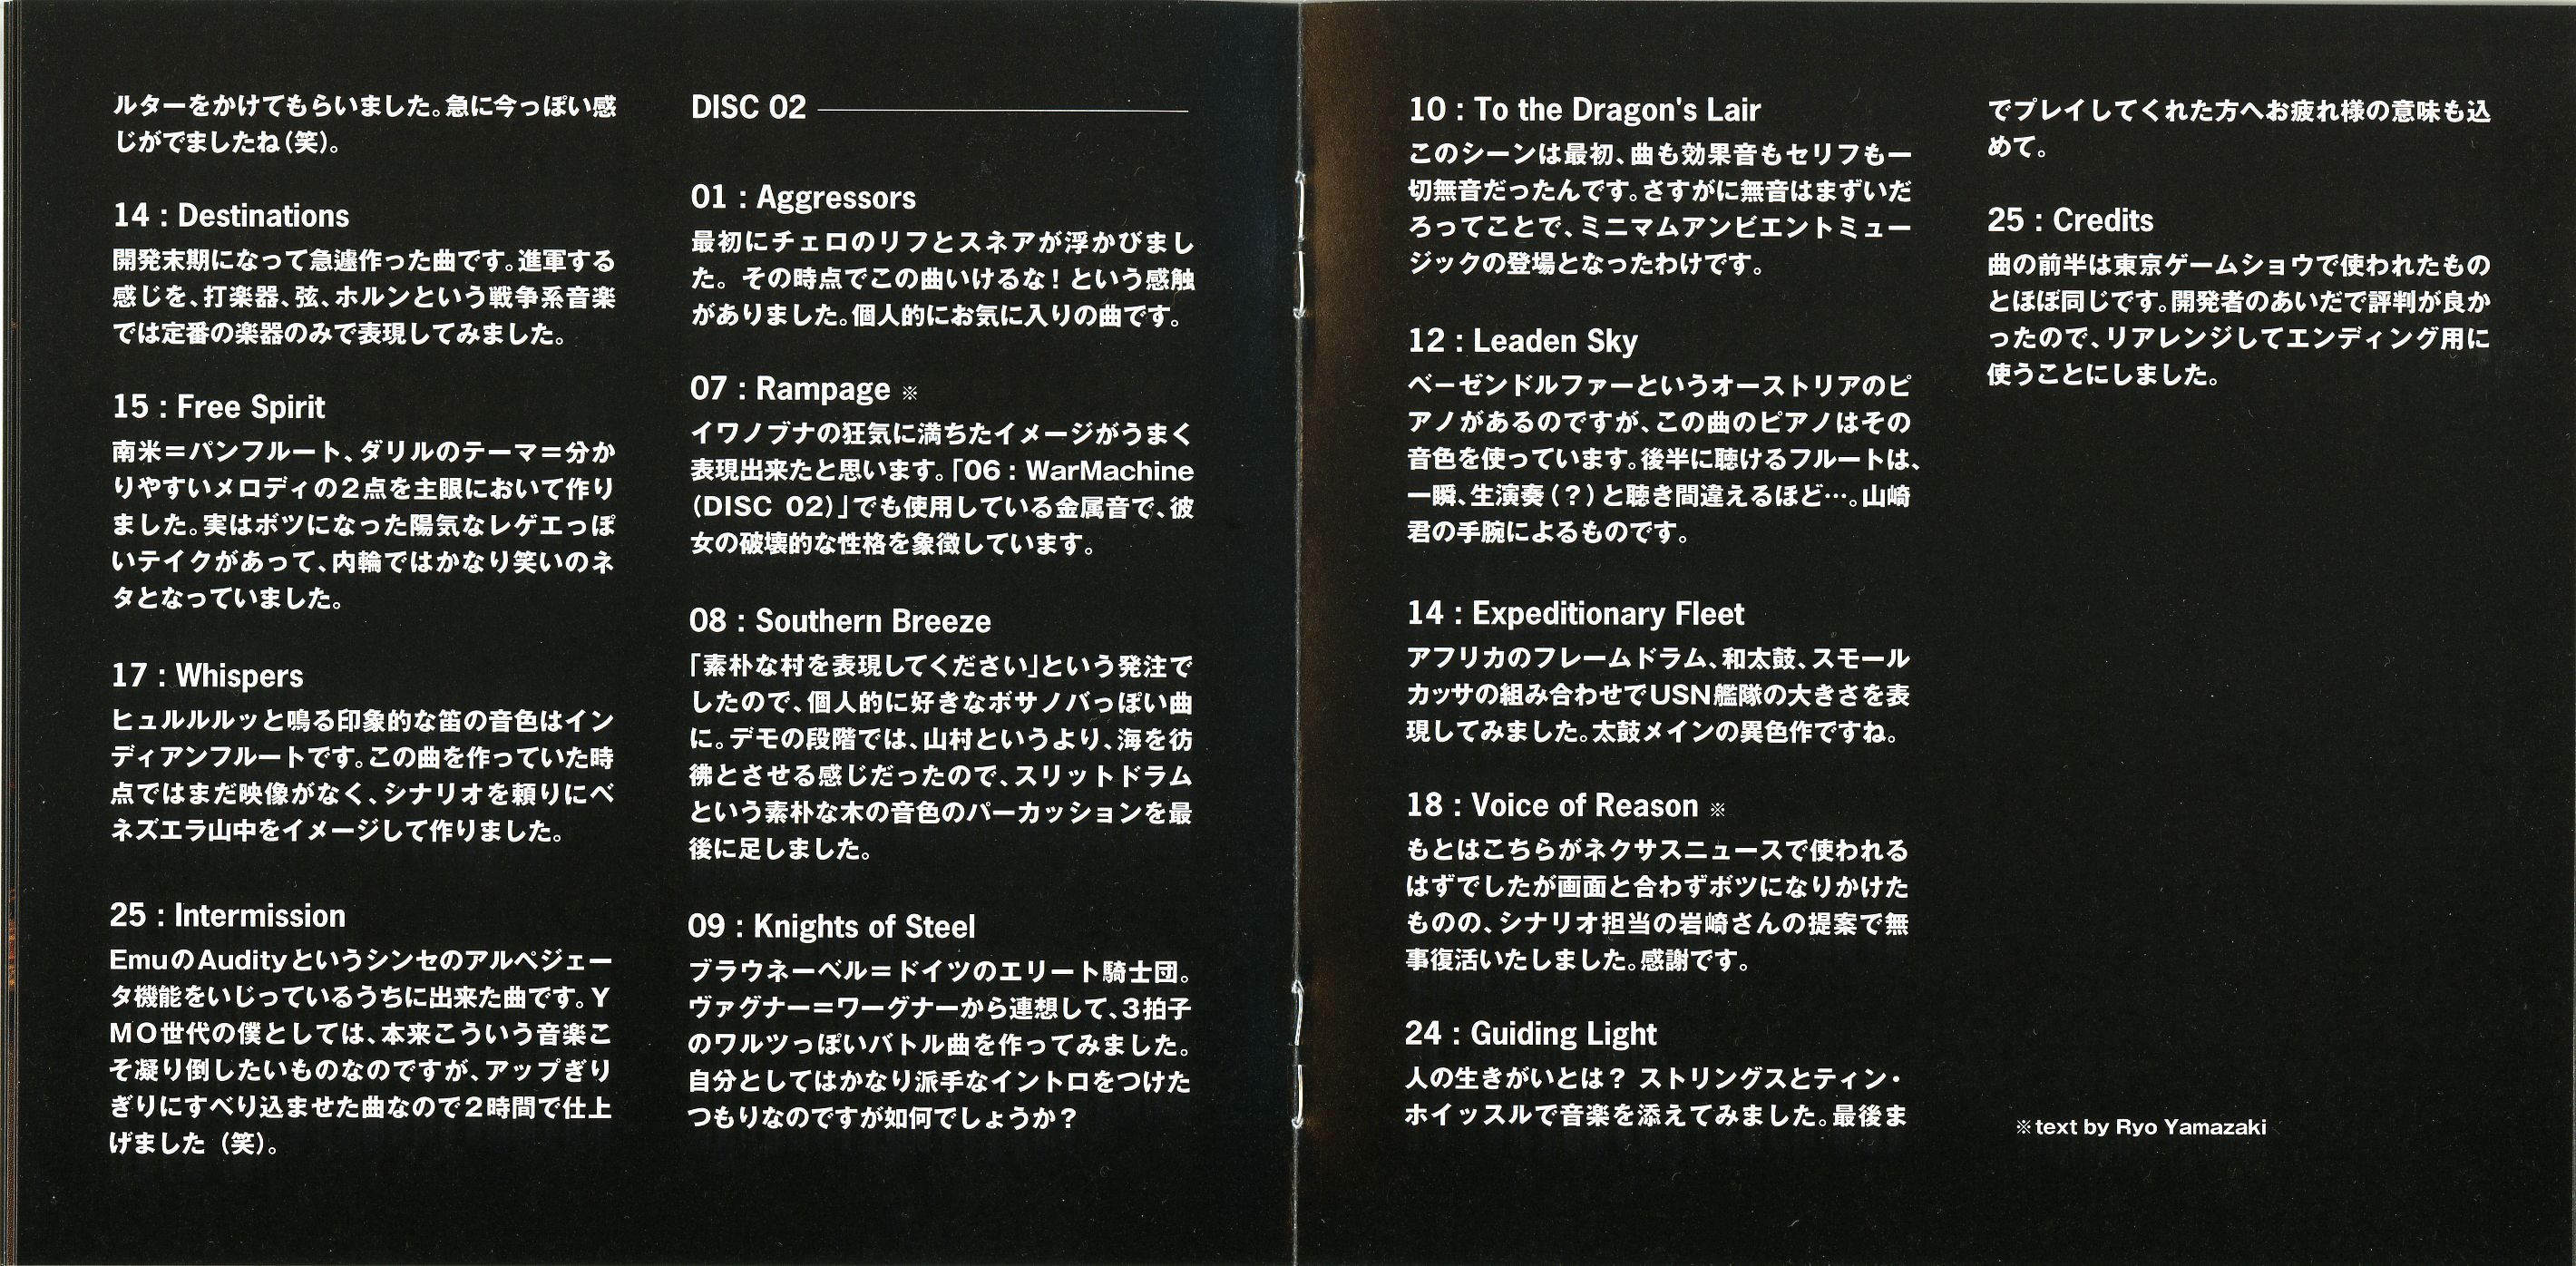 FM4 cover - 1+4 #07 booklet